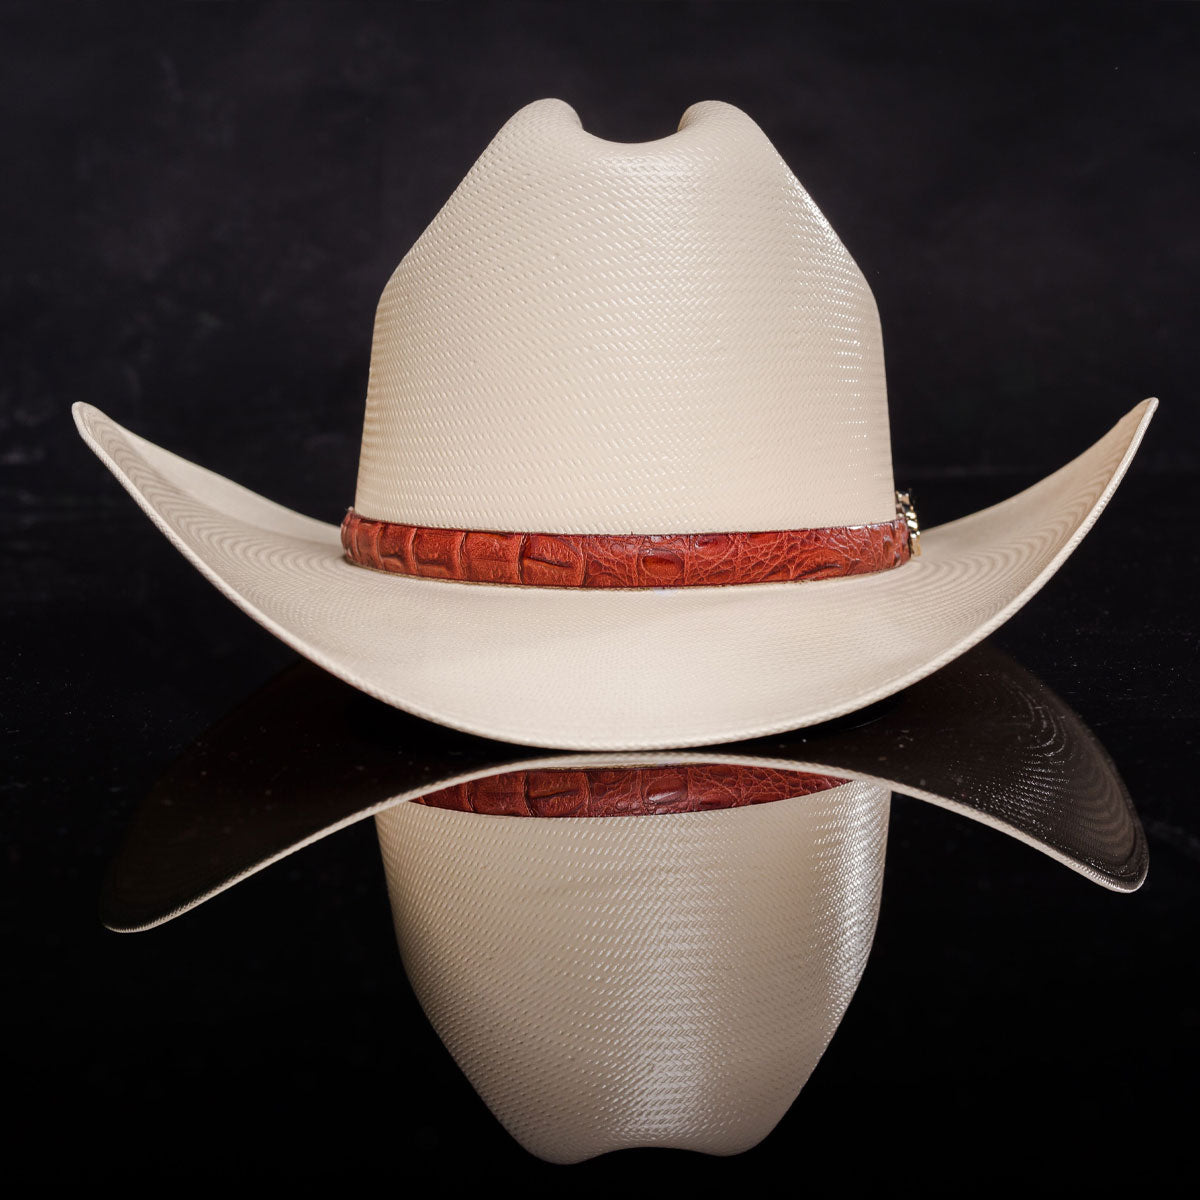 Sombrero 1OOx Rodeo Blanco - West Point Hats - Sombreros West Point: Sombreros  Vaqueros, Texanas y Sombreros WestPoint